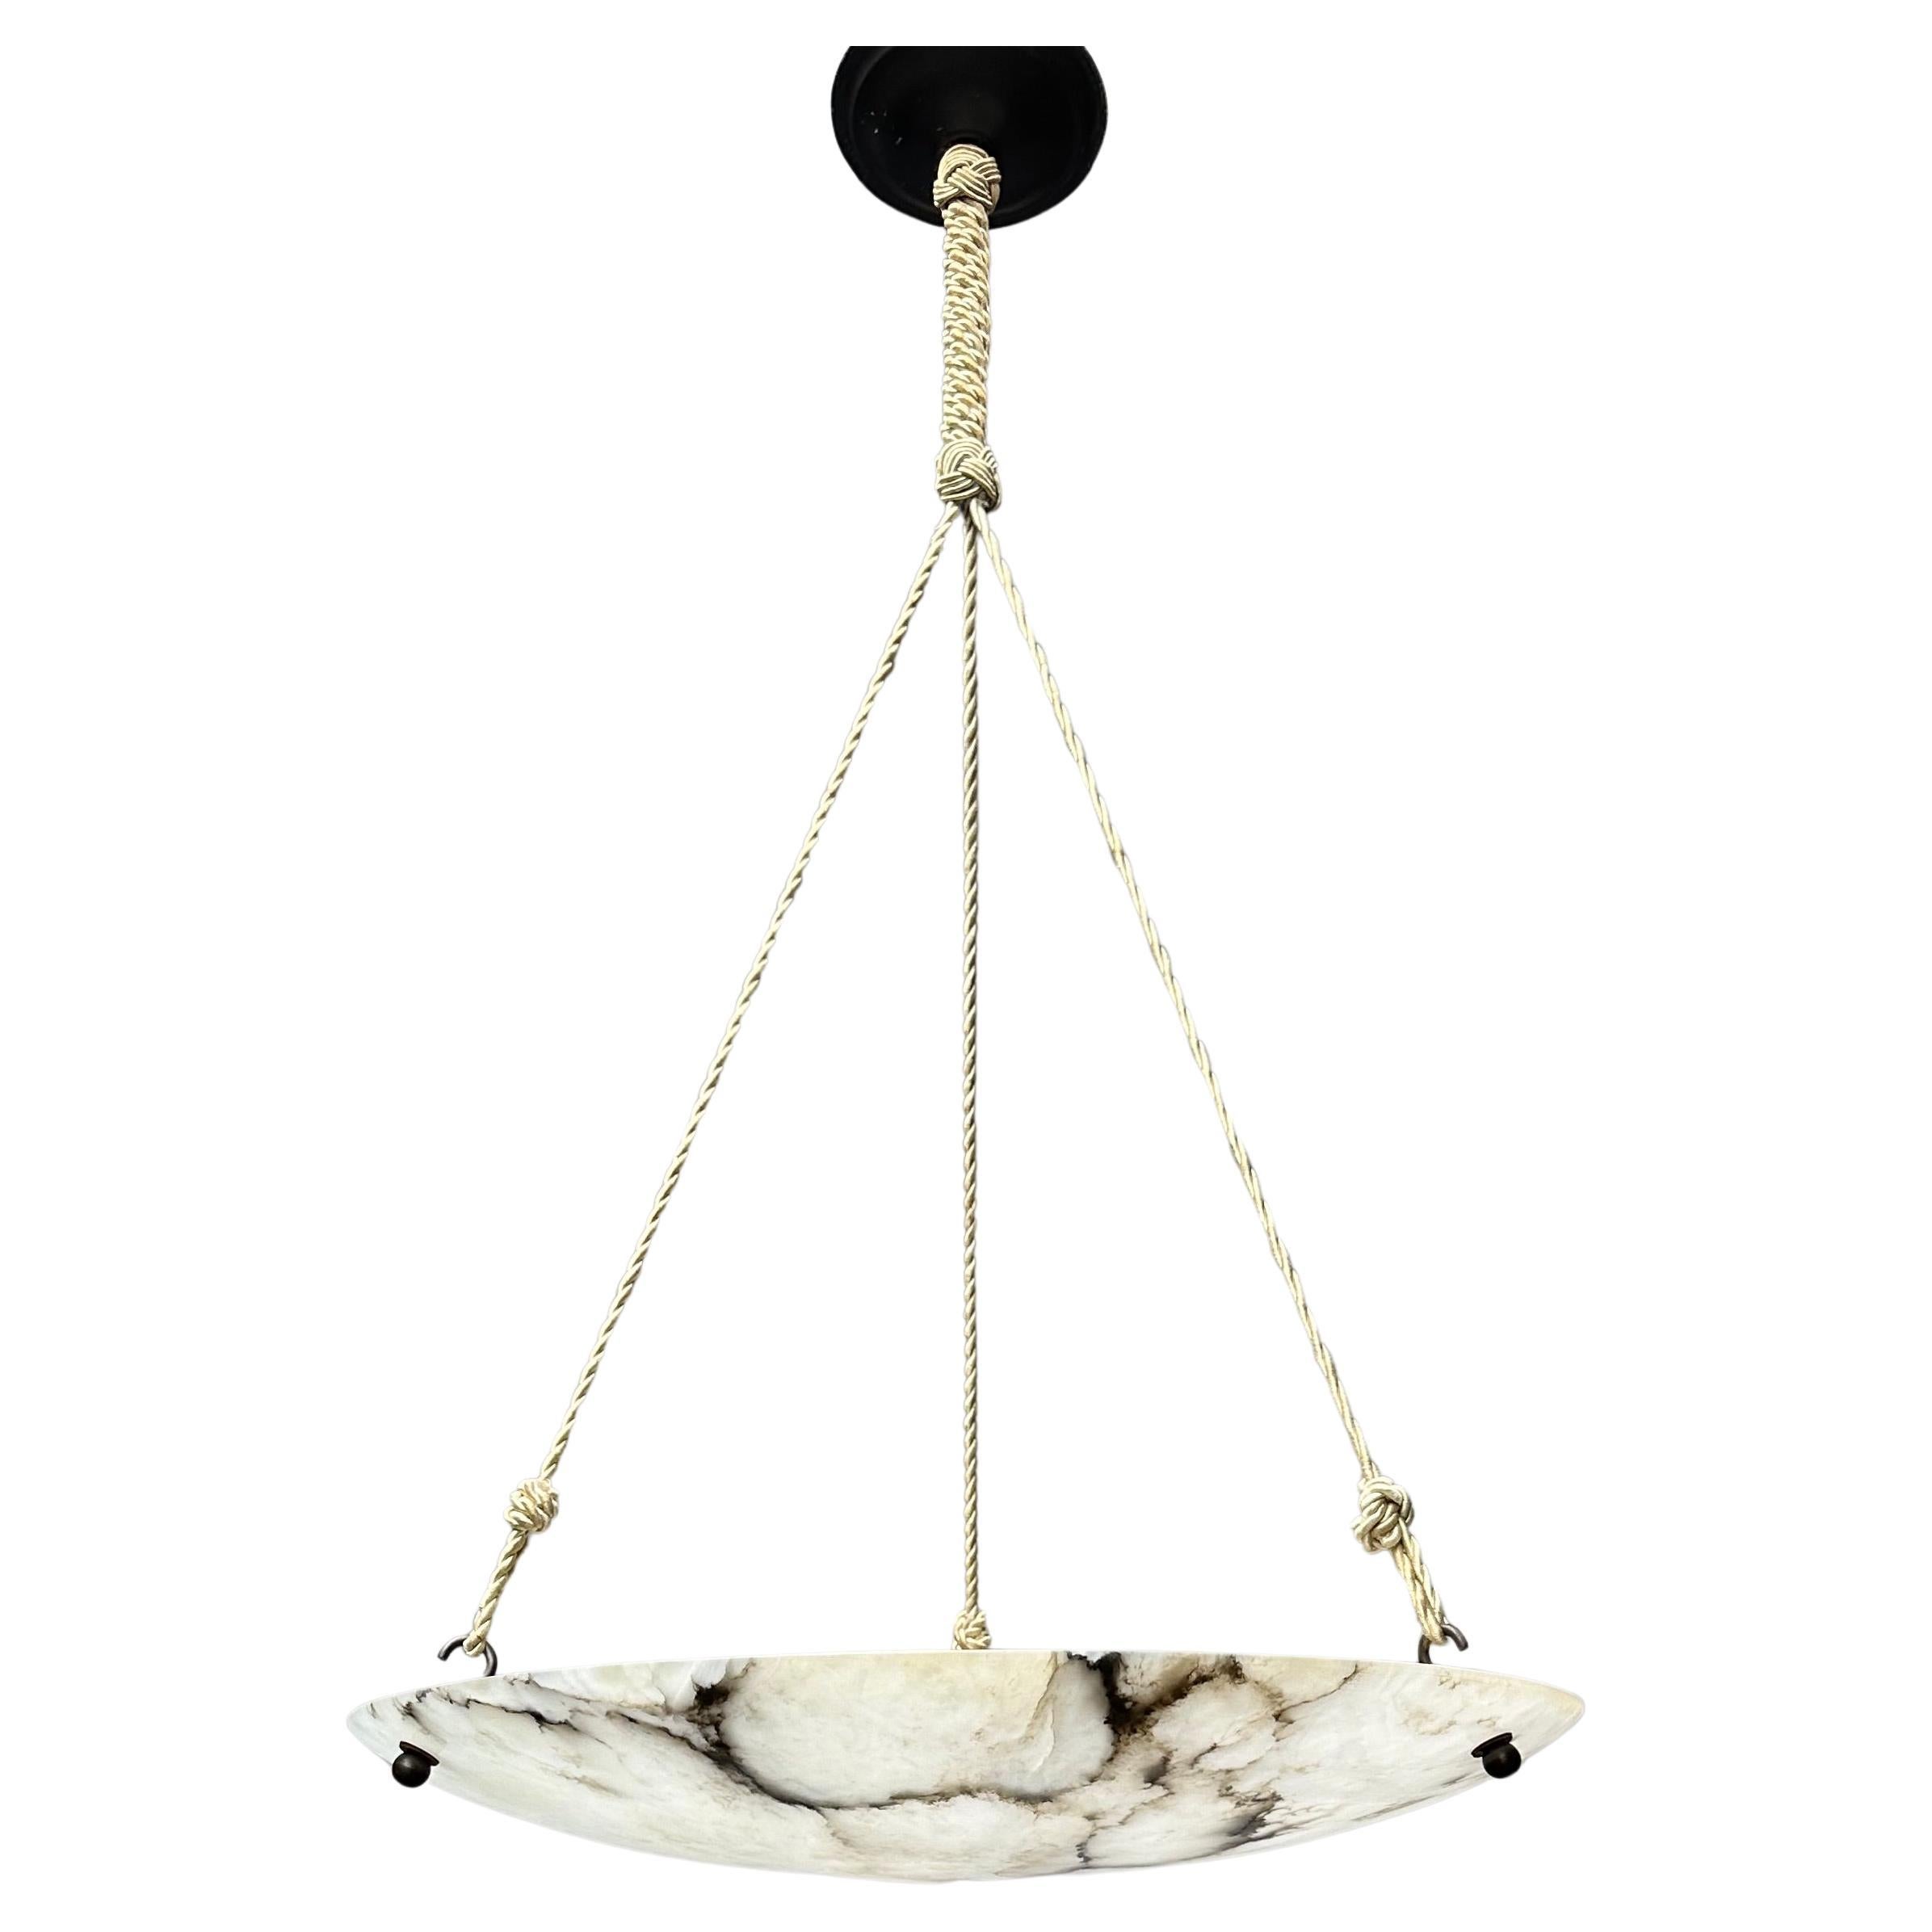 Large antique alabaster chandelier, from the early 1900s.

This rare, almost flat and large size alabaster light fixture also is of a beautiful design. The stunning and superbly polished alabaster shade makes this impressive light fixture even more